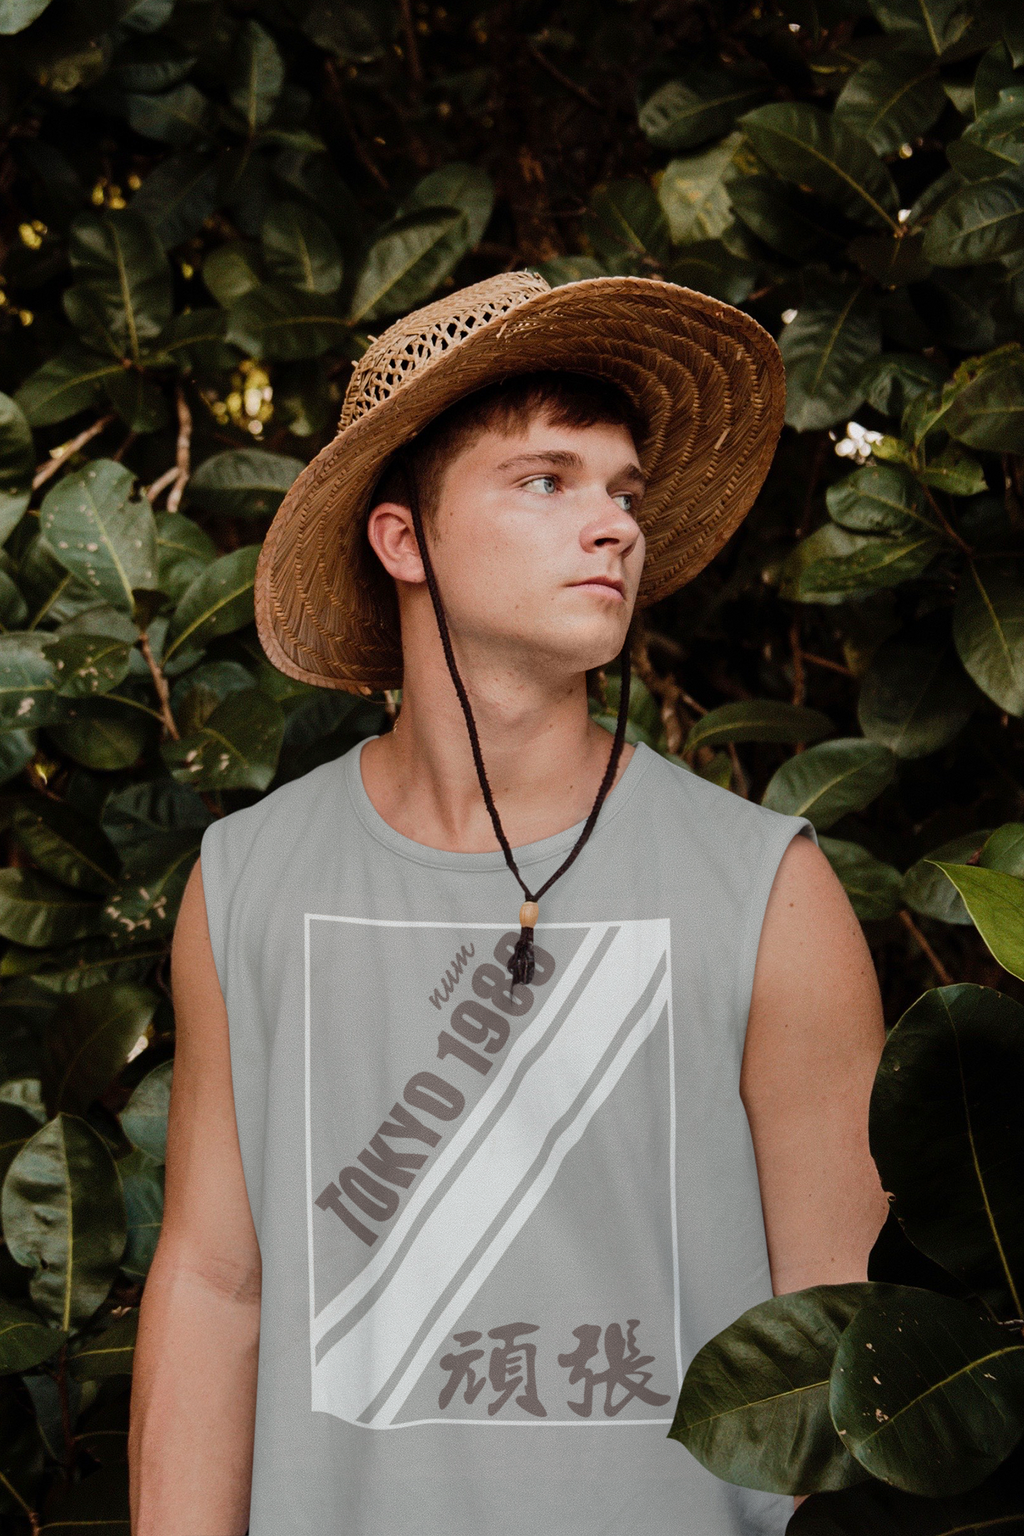 sleeveless-shirt-mockup-of-a-young-man-in-a-garden-45329-r-el2.png